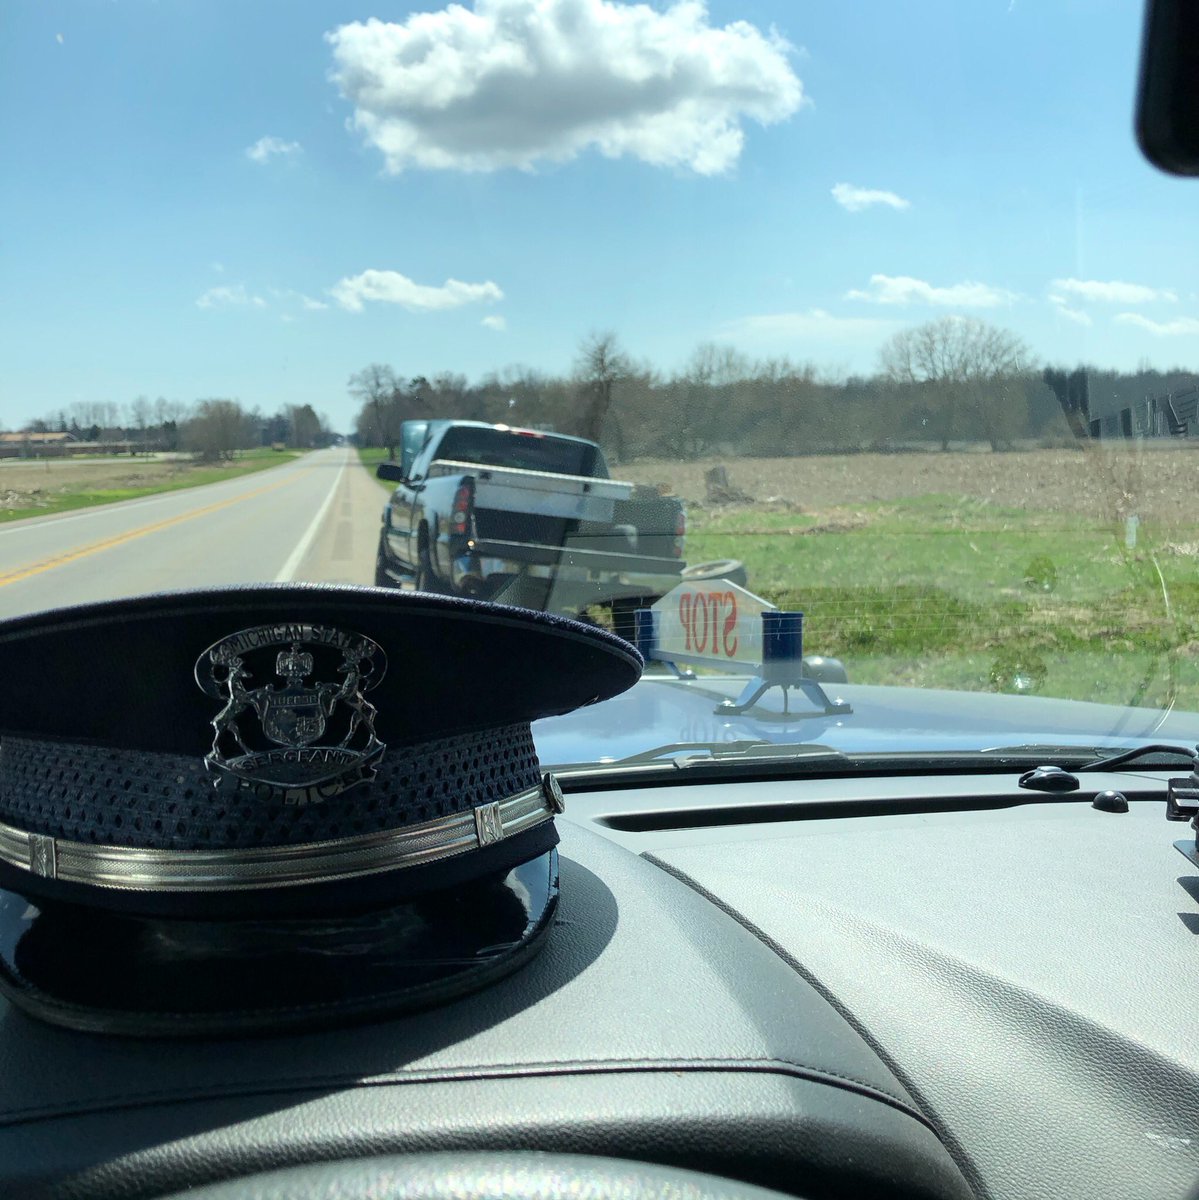 Members of the Michigan State Police continue to  #DoMIpart during the  #COVID19 emergency. Here’s a look at the  #ViewFromMyOffice of Sergeant Metivier assisting a motorist in Montcalm County.